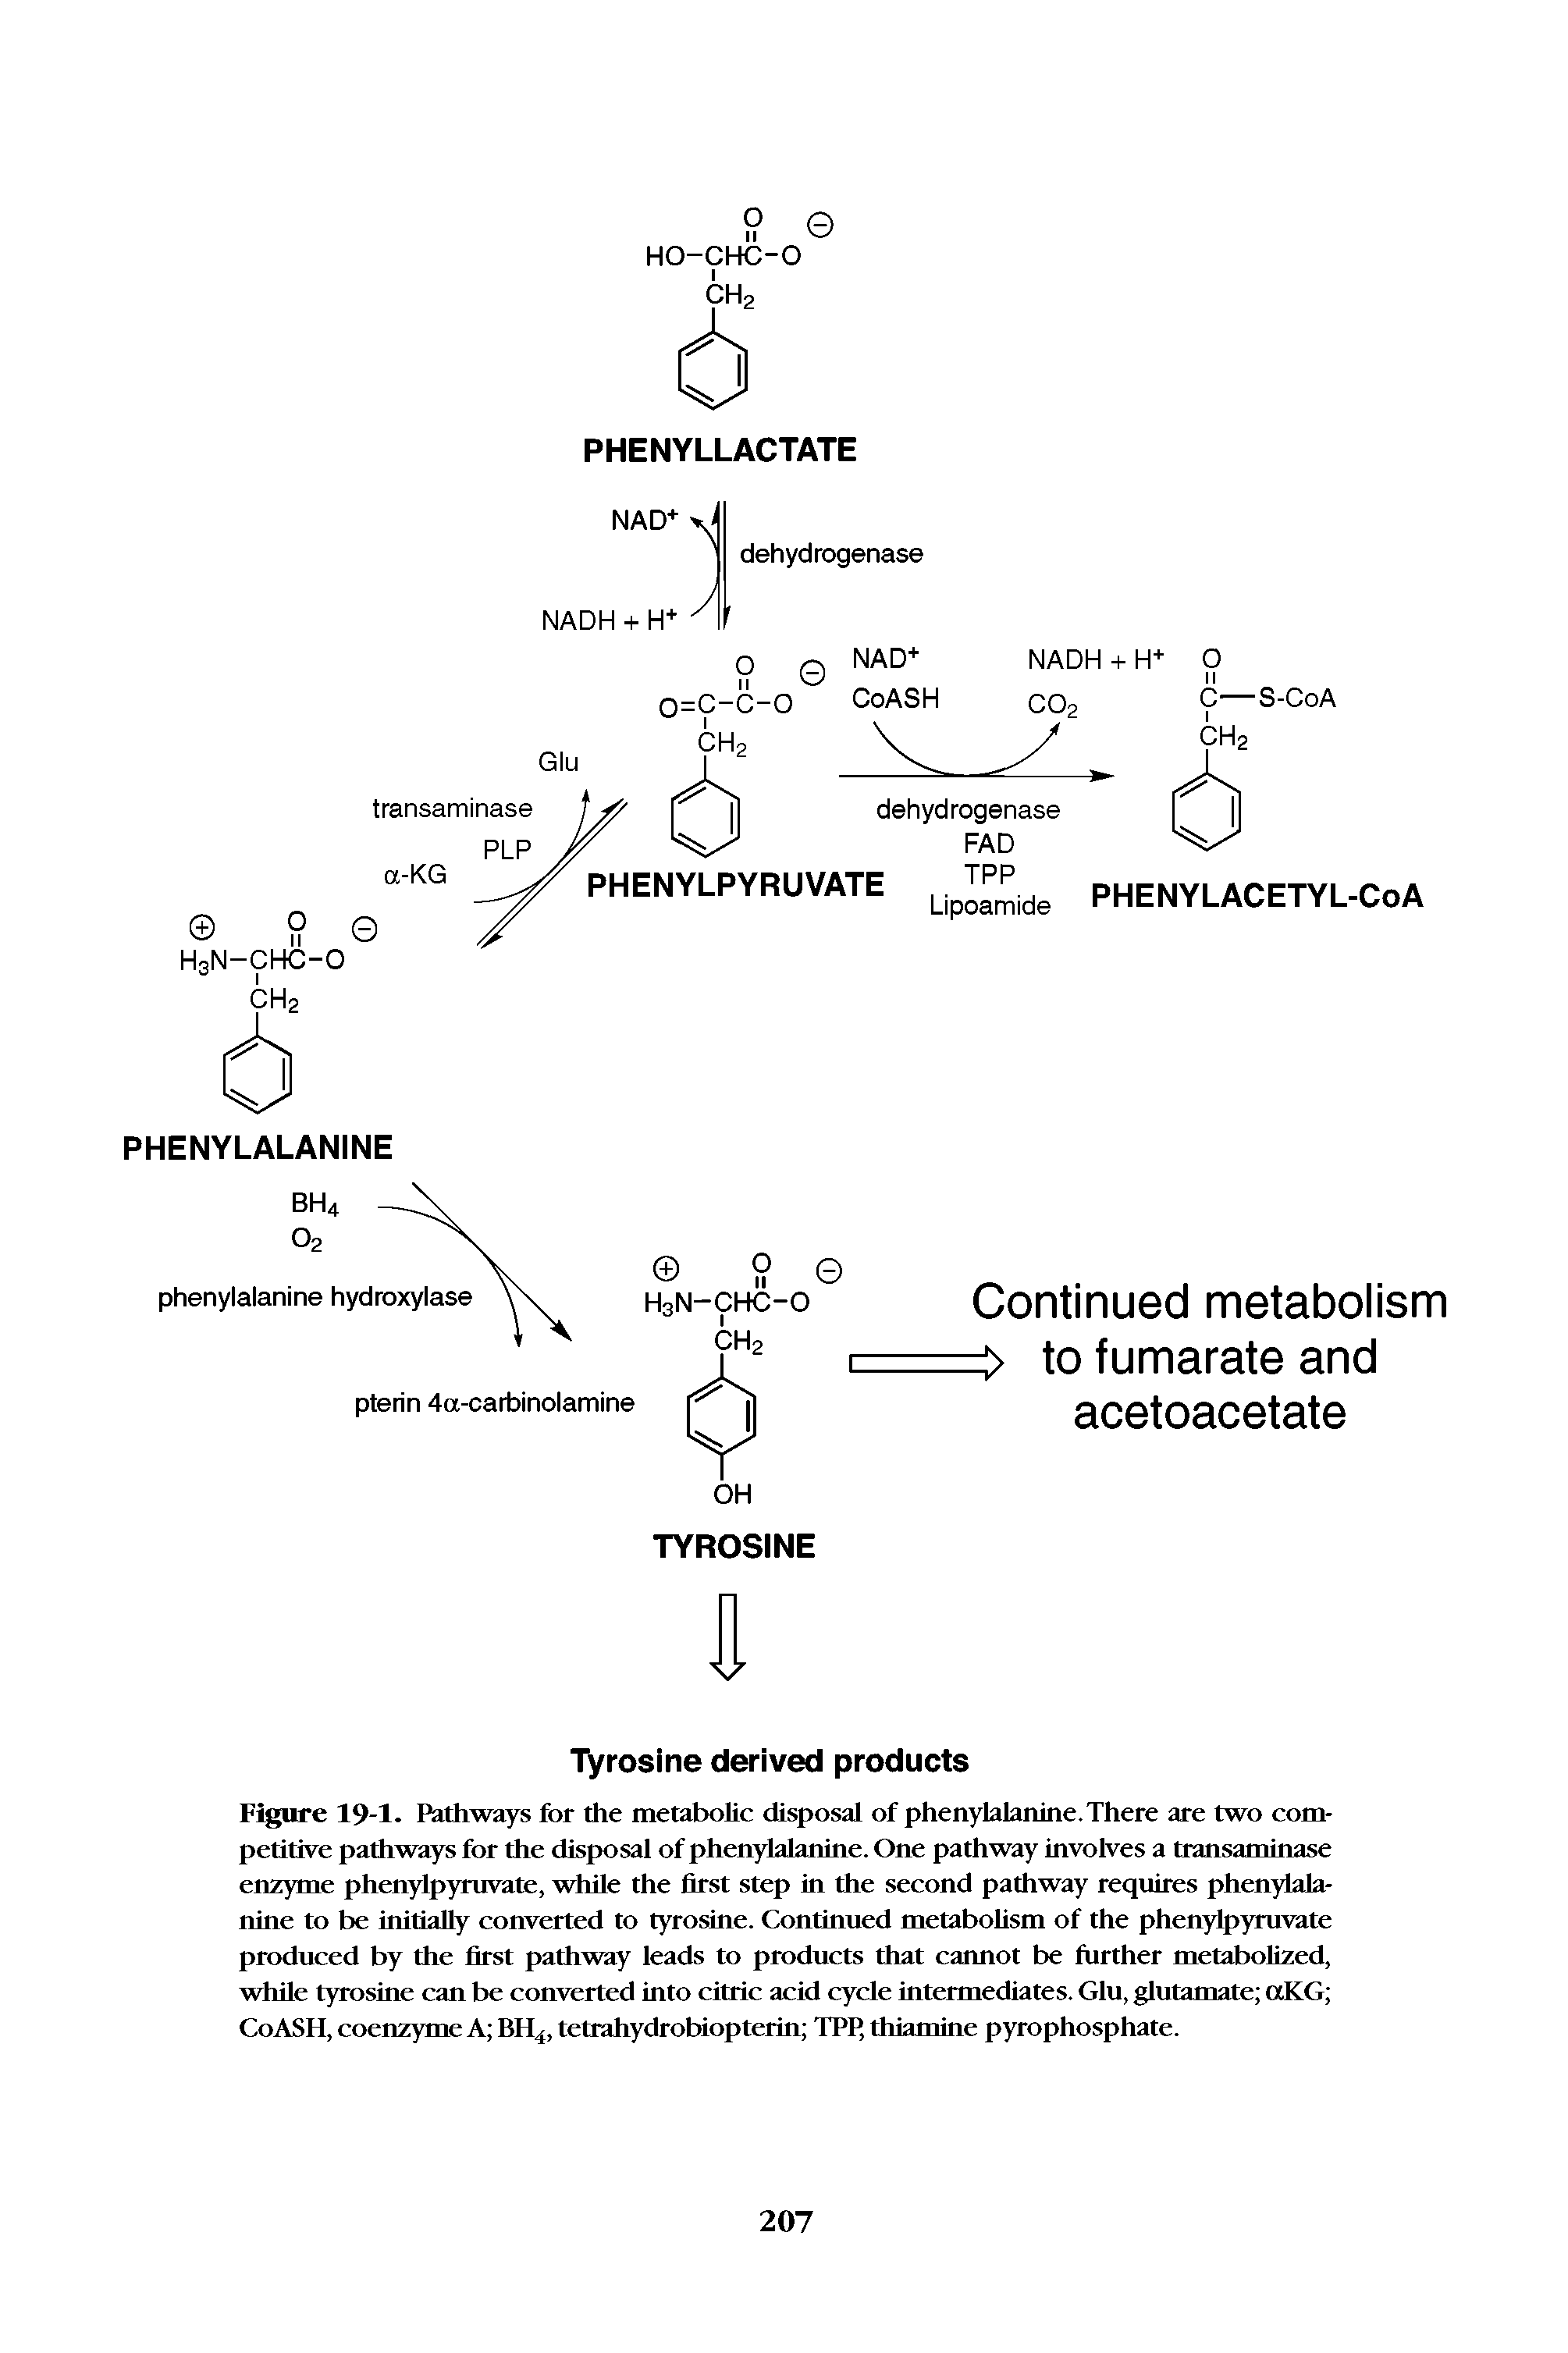 Figure 19-1. Pathways for the metabolic disposal of phenylalanine. There are two competitive pathways for the disposal of phenylalanine. One pathway involves a transaminase enzyme phenylpyruvate, while the first step in the second pathway requires phenylalanine to be initially converted to tyrosine. Continued metabolism of the phenylpyruvate produced by the first pathway leads to products that cannot be further metabolized, while tyrosine can be converted into citric acid cycle intermediates. Glu, glutamate aKG CoASH, coenzyme A BH4, tetrahydrobiopterin TPP, thiamine pyrophosphate.